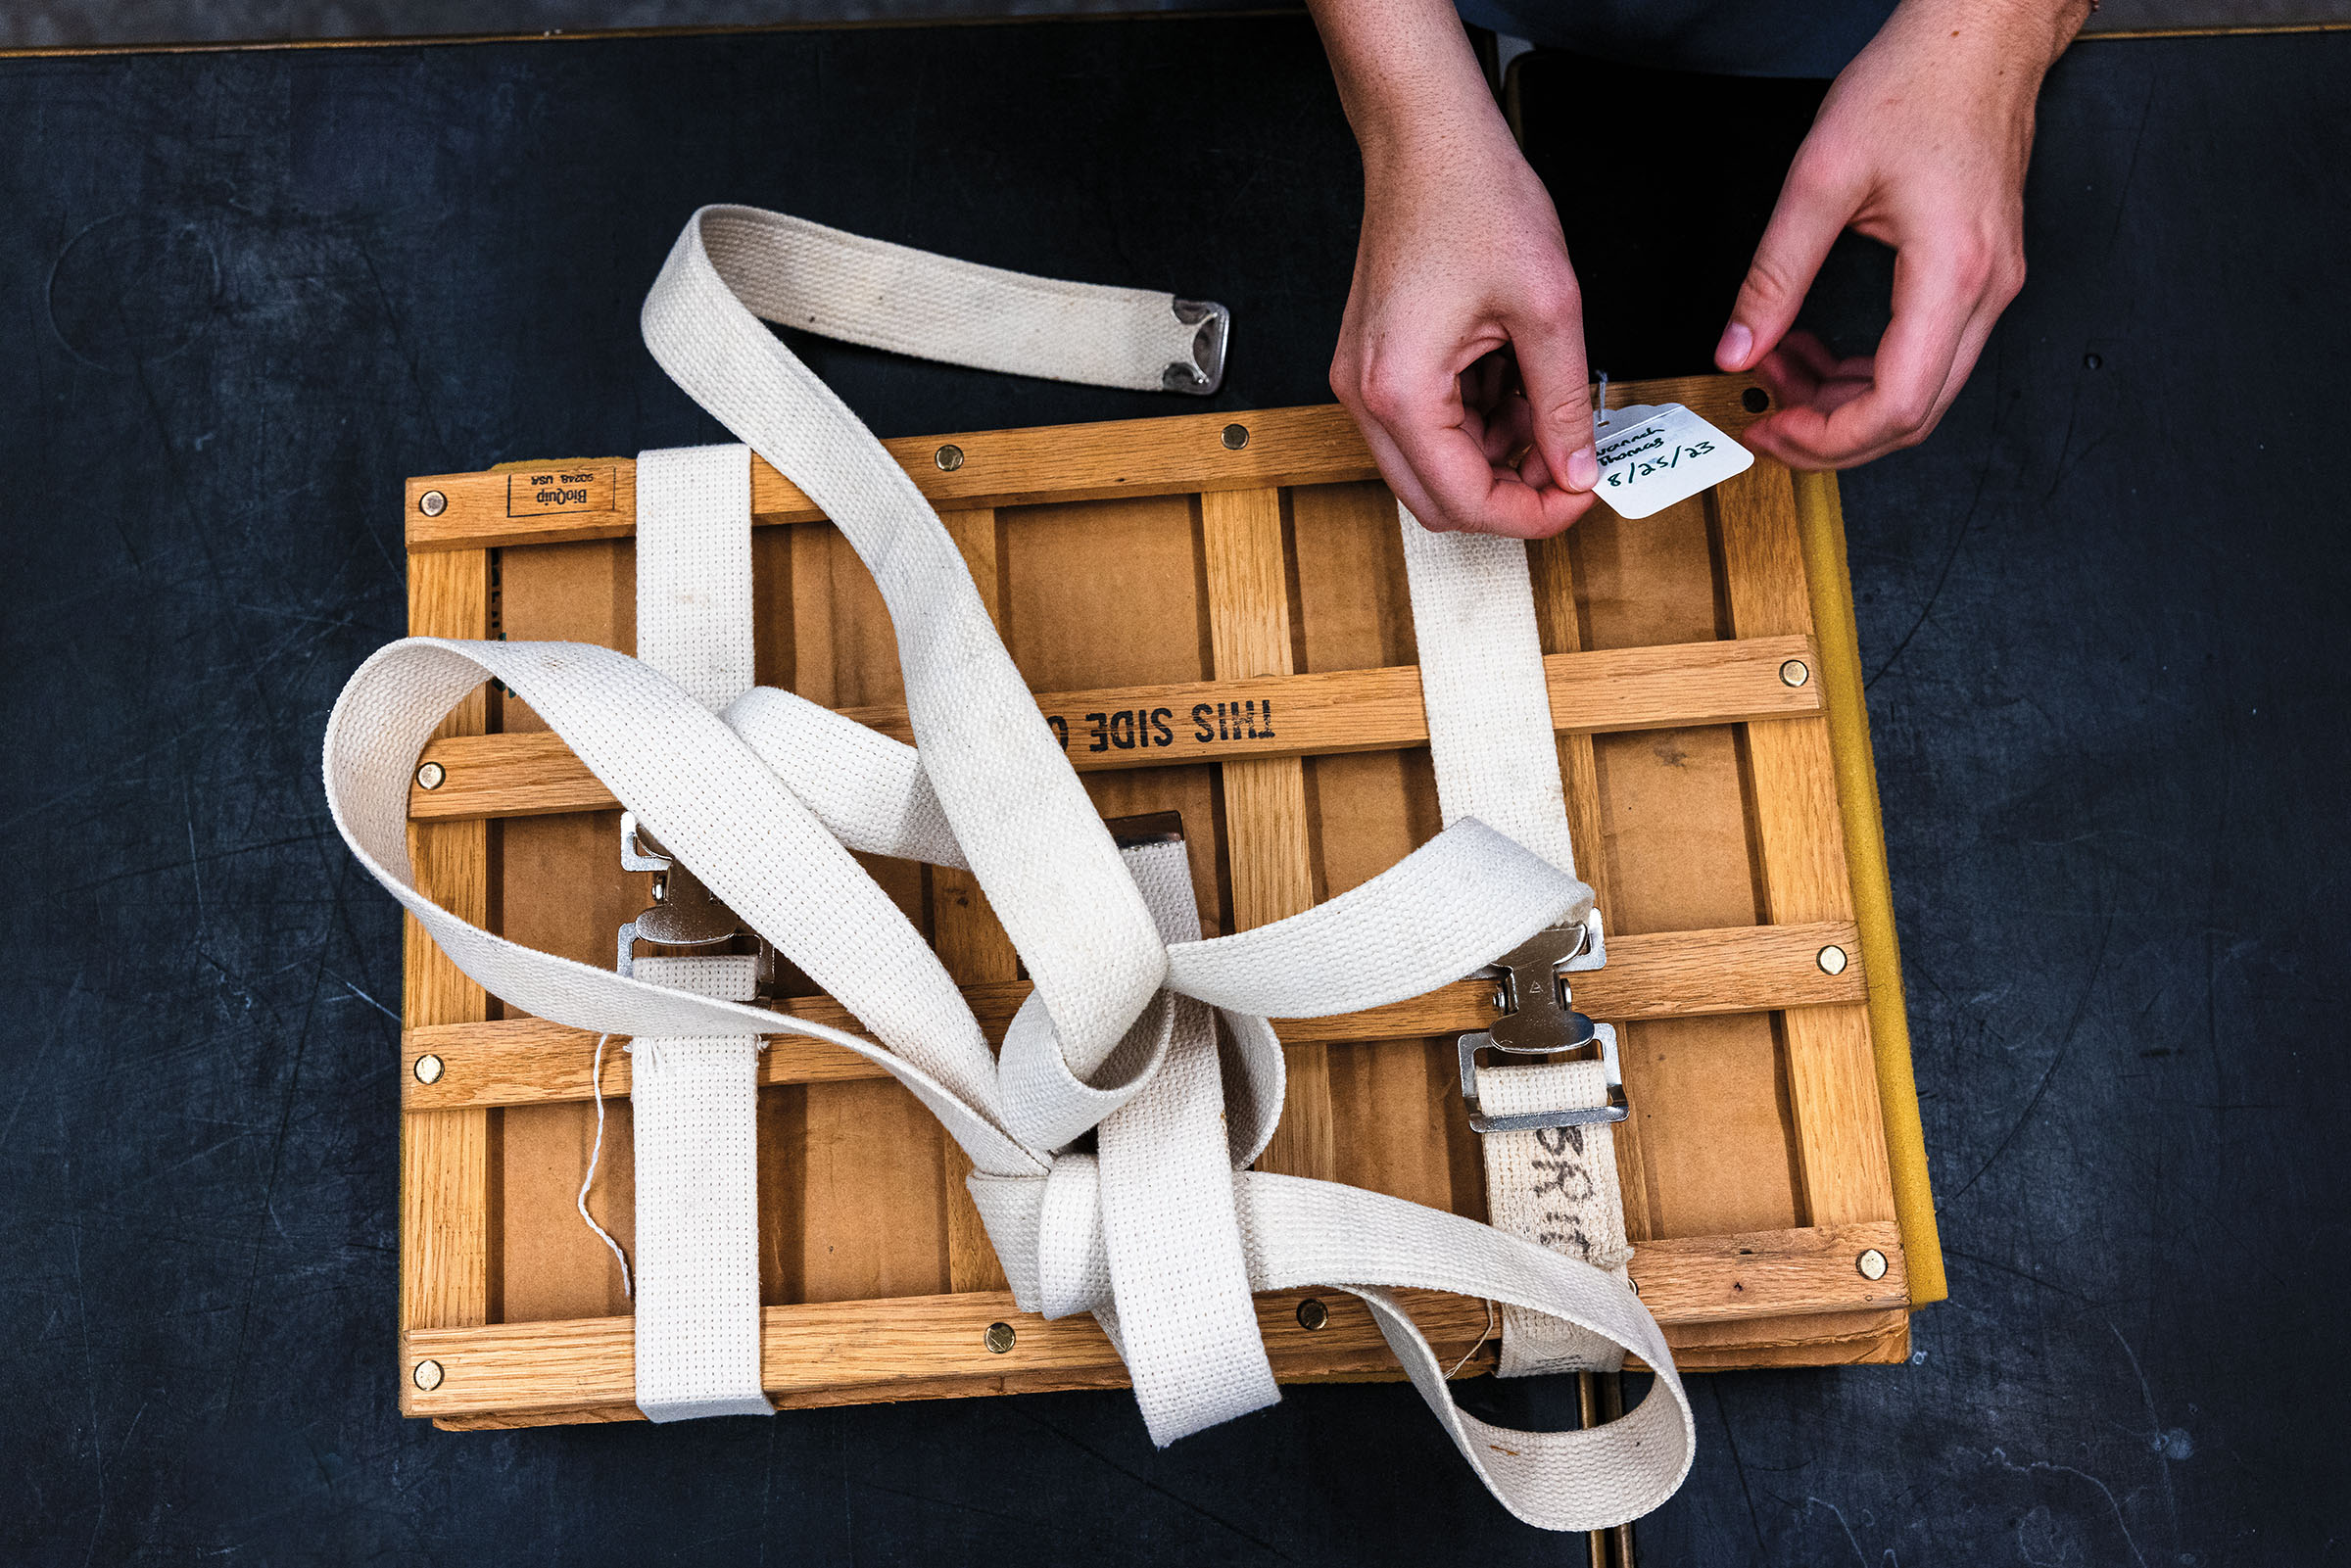 An overhead view of a person tightening white straps on a wooden pressing contraption